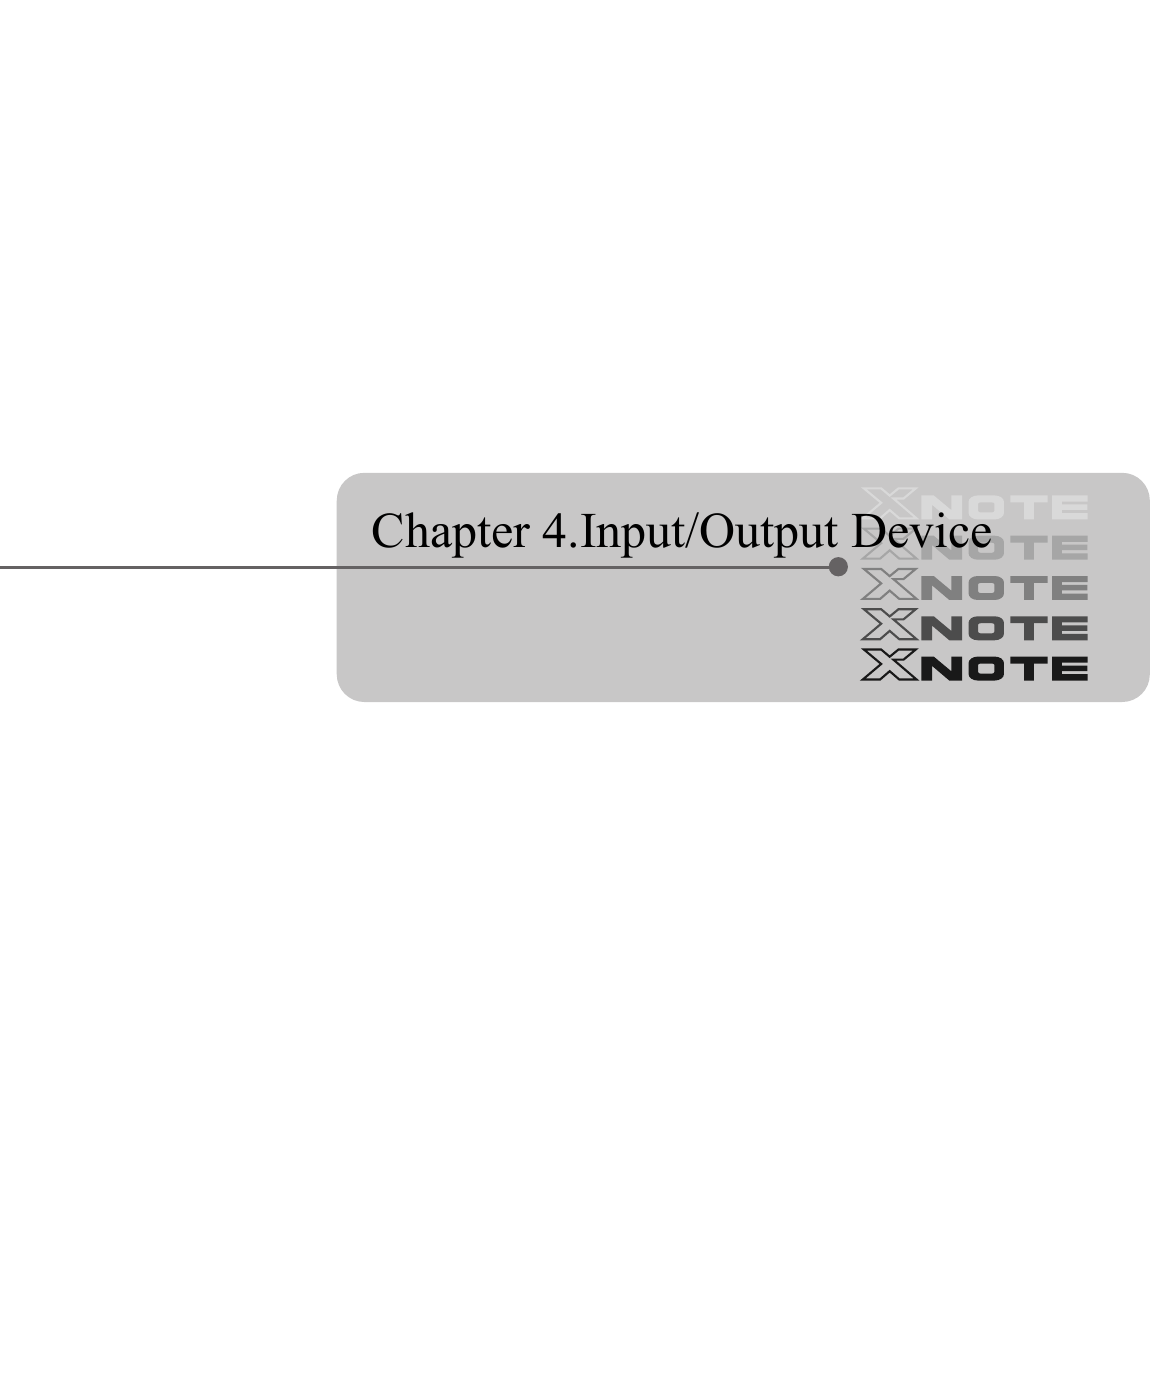  Chapter 4.Input/Output Device